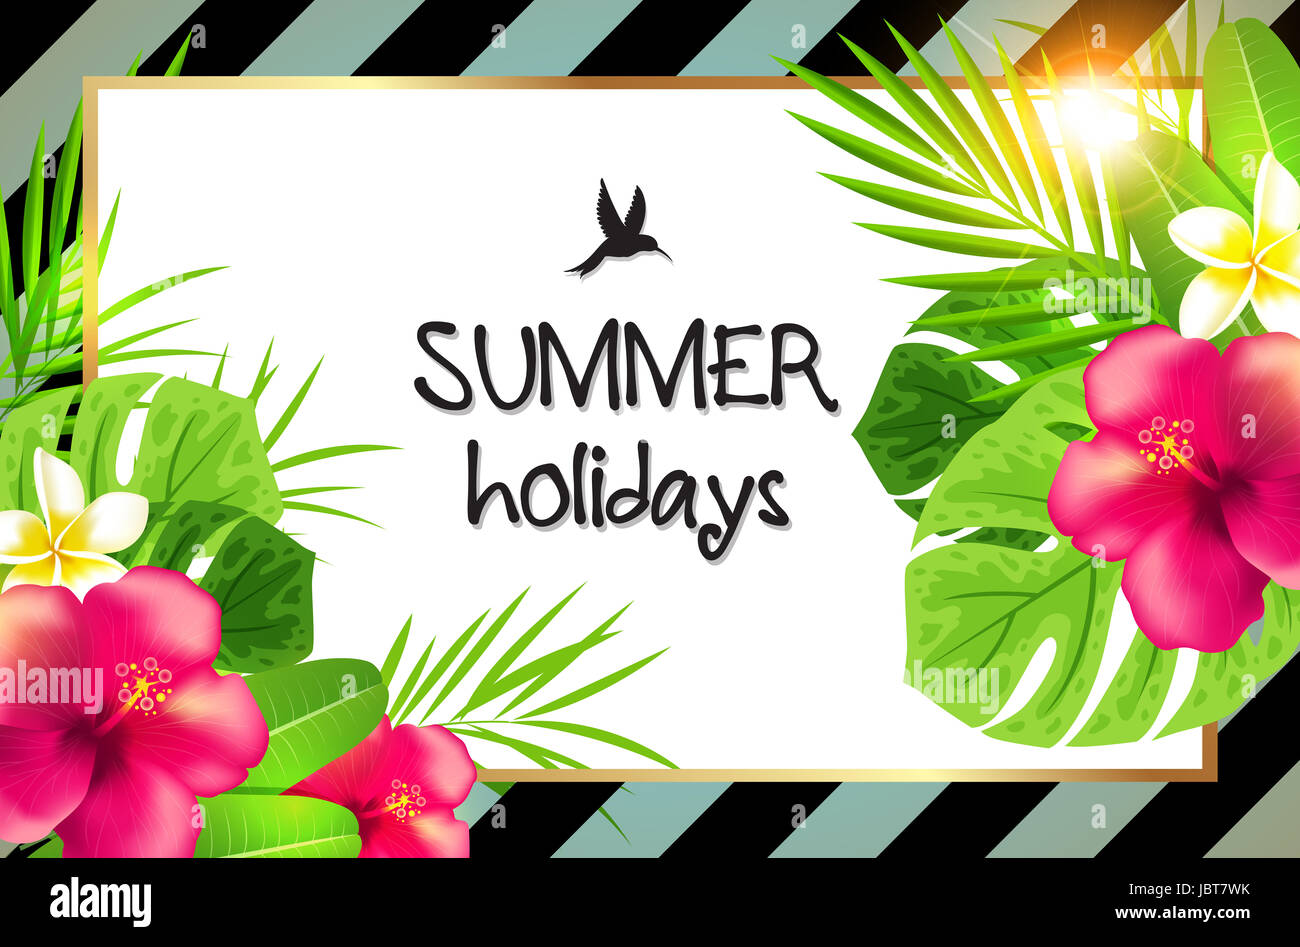 Summer tropical background with green palm leaves and red flowers. Summer holiday lettering. Retro striped background. Stock Photo